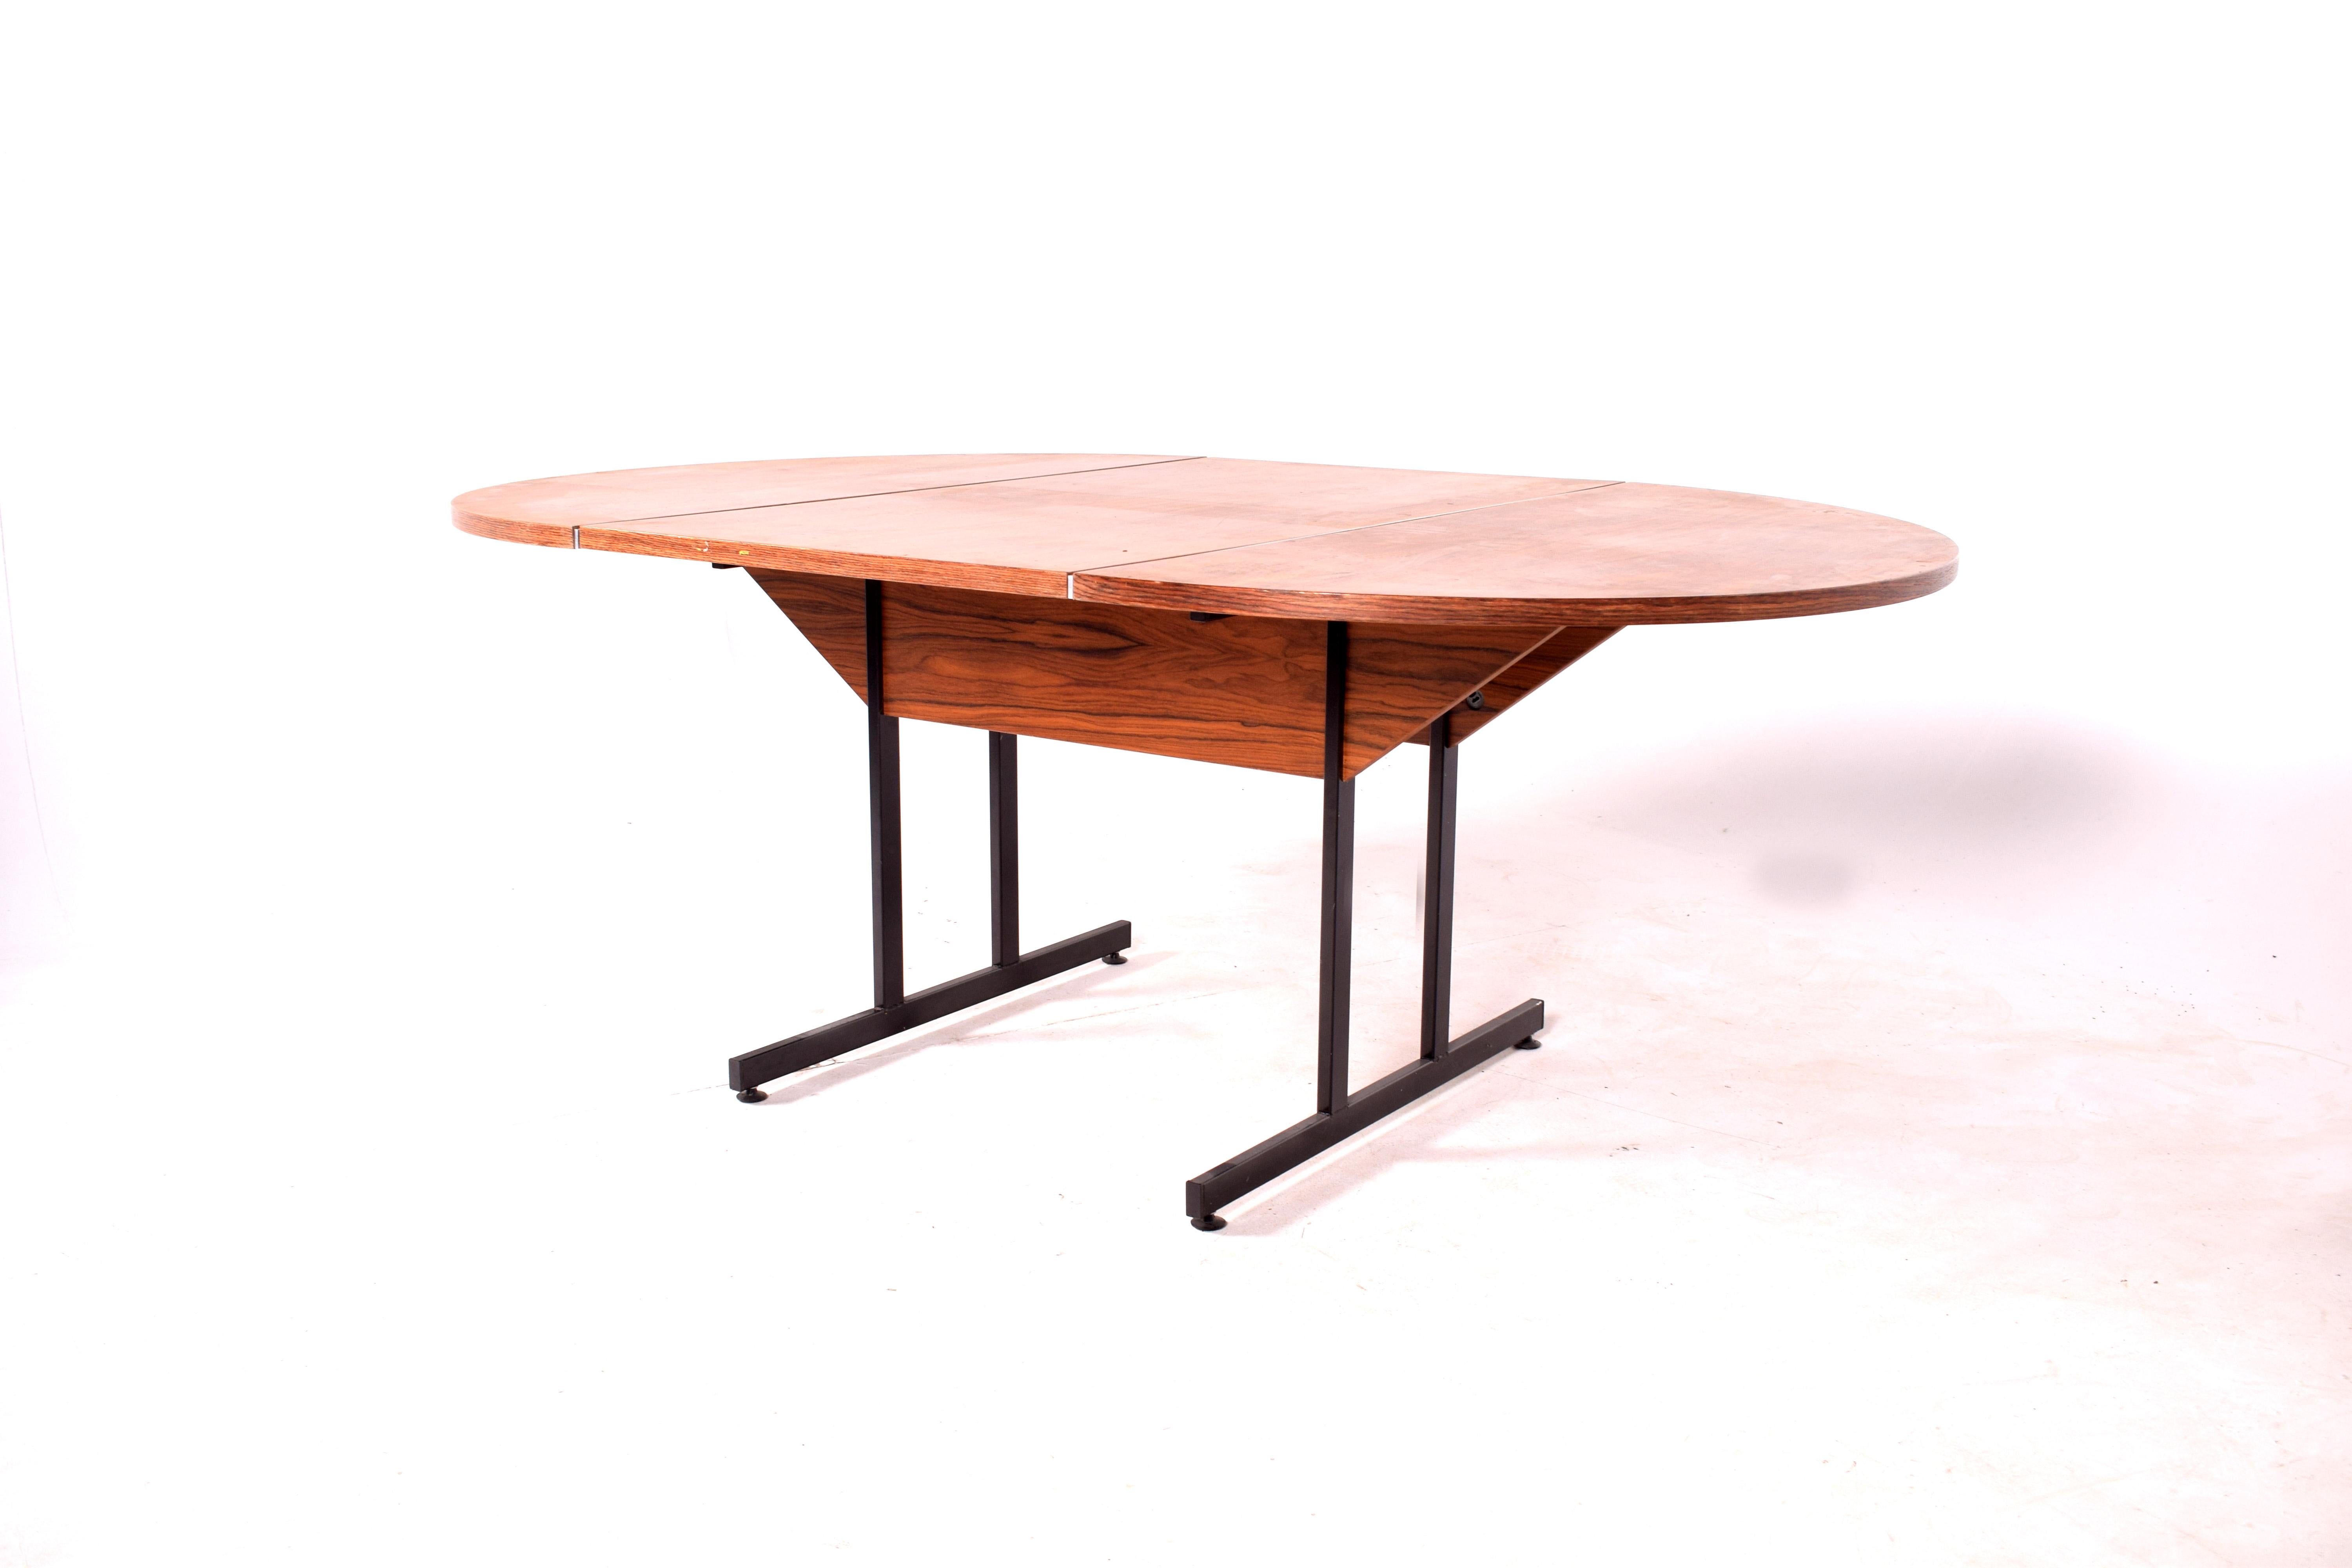 Rare oval dining or work table, made of rosewood veneer with a central foot in wood and metal. It has two aluminum applications on the top, which gives it a modern and different look.